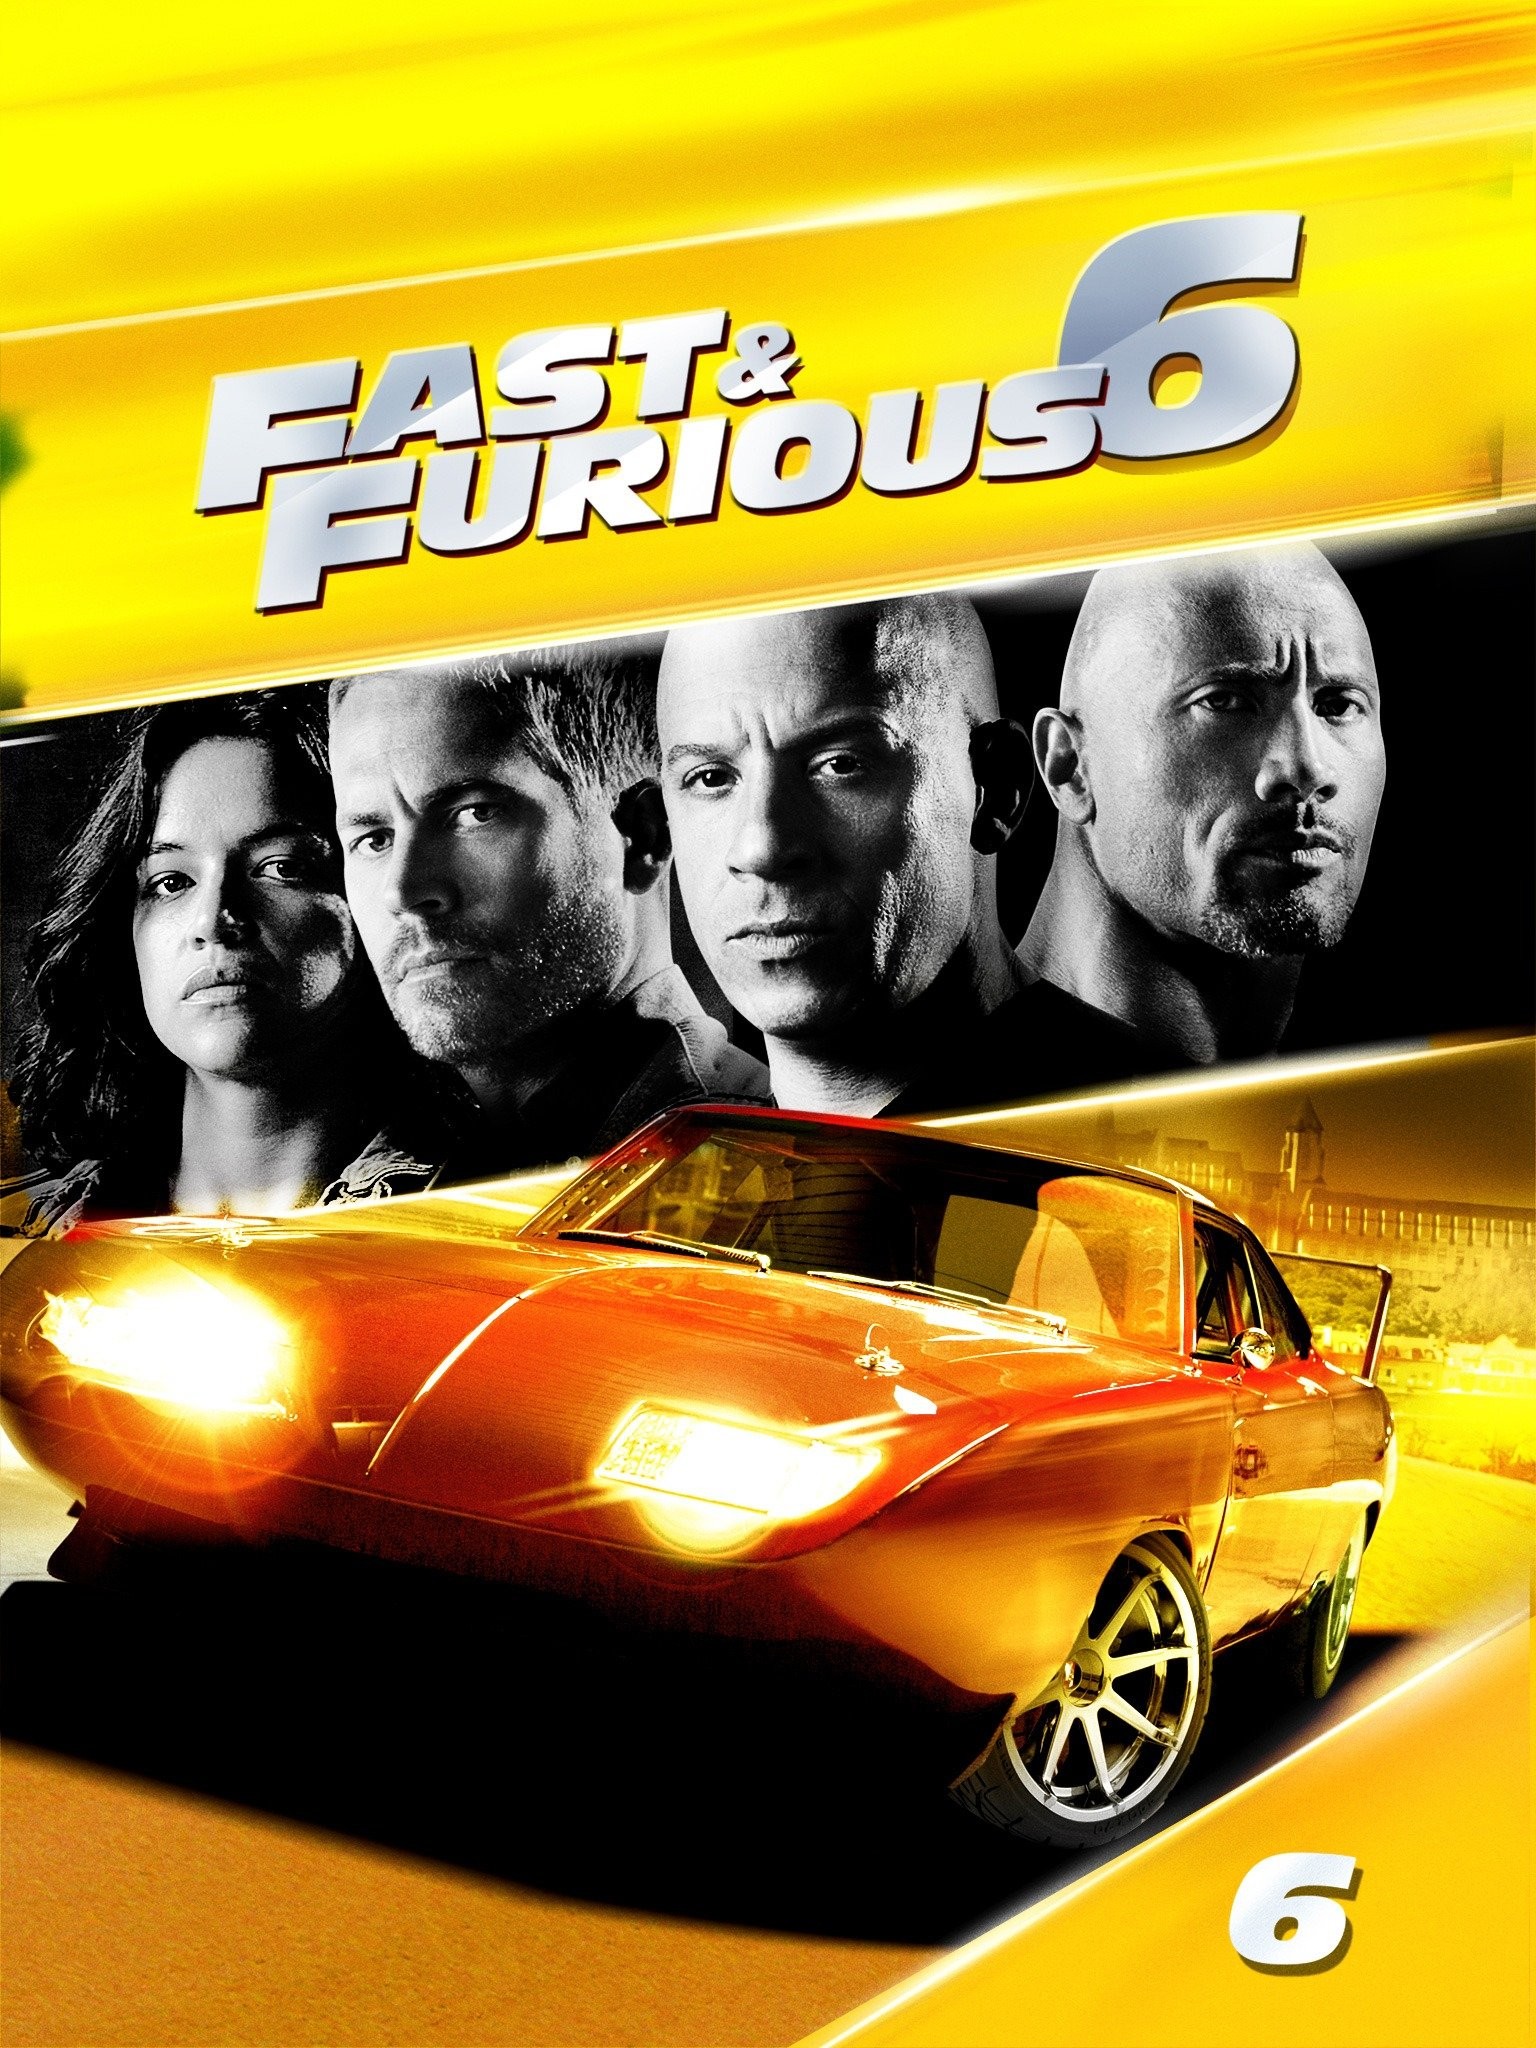 Fast Five the Movie / Fast & Furious 5 - Mac - Official Game trailer 